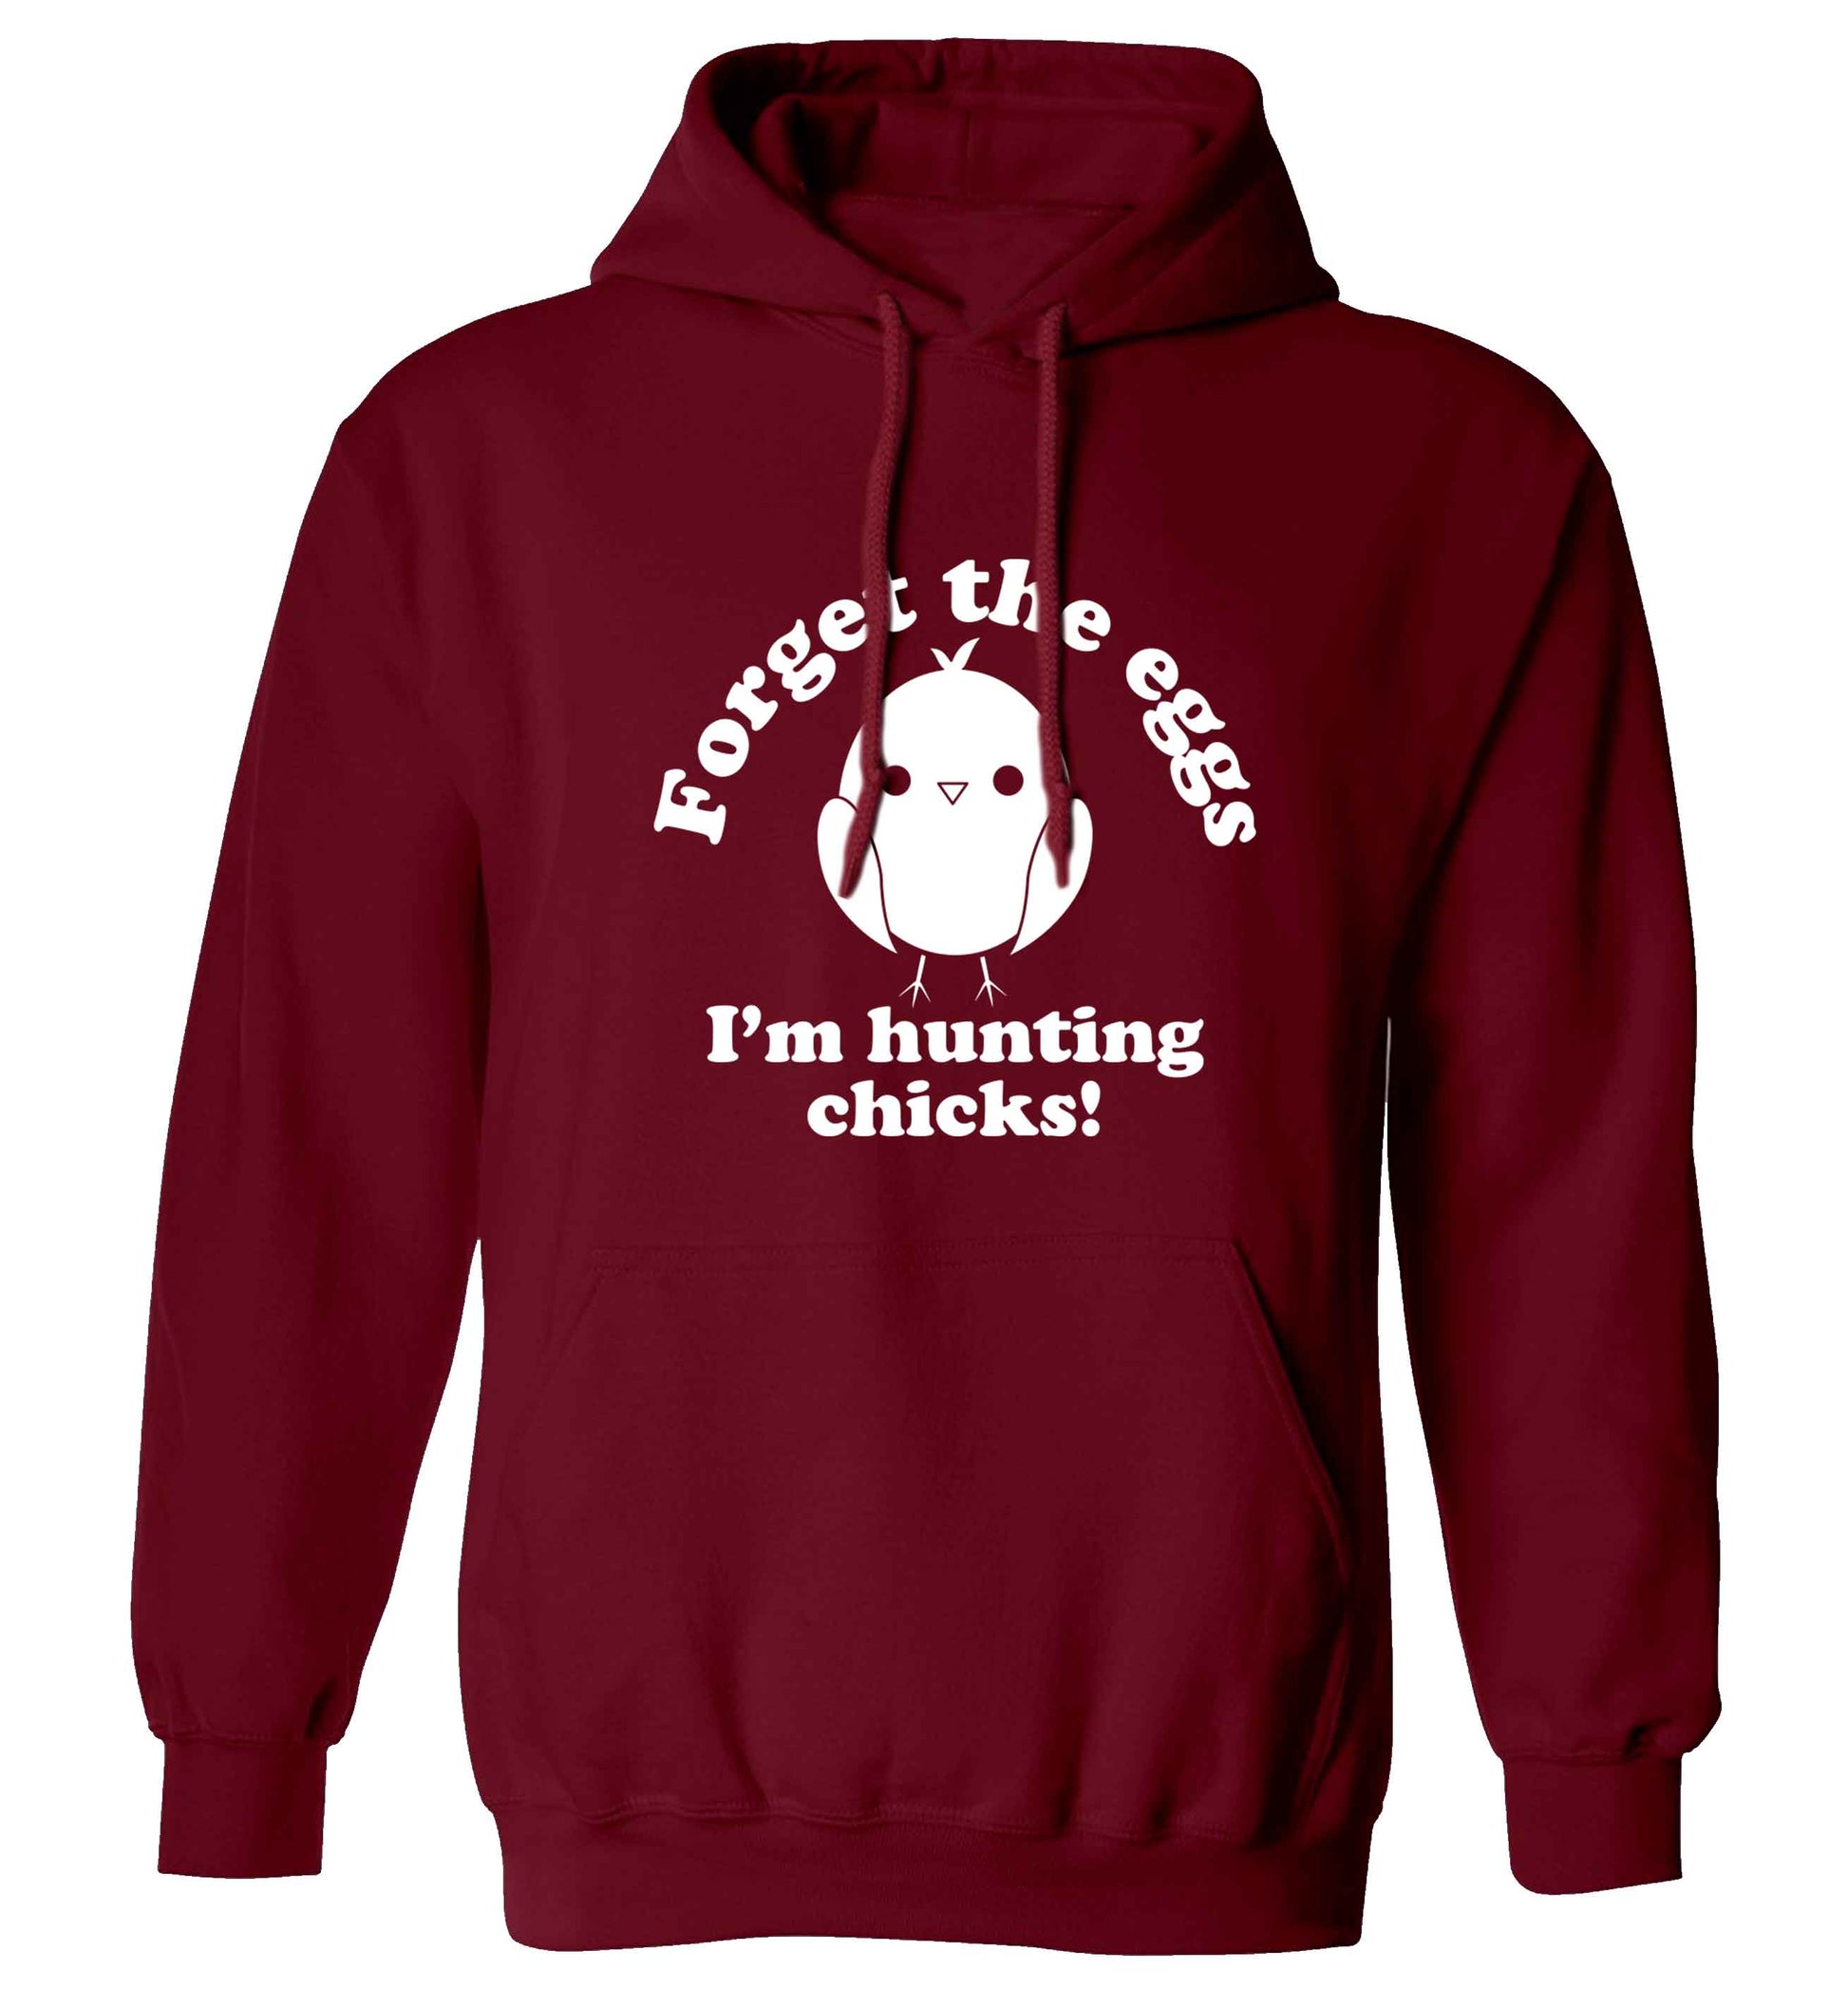 Forget the eggs I'm hunting chicks! adults unisex maroon hoodie 2XL